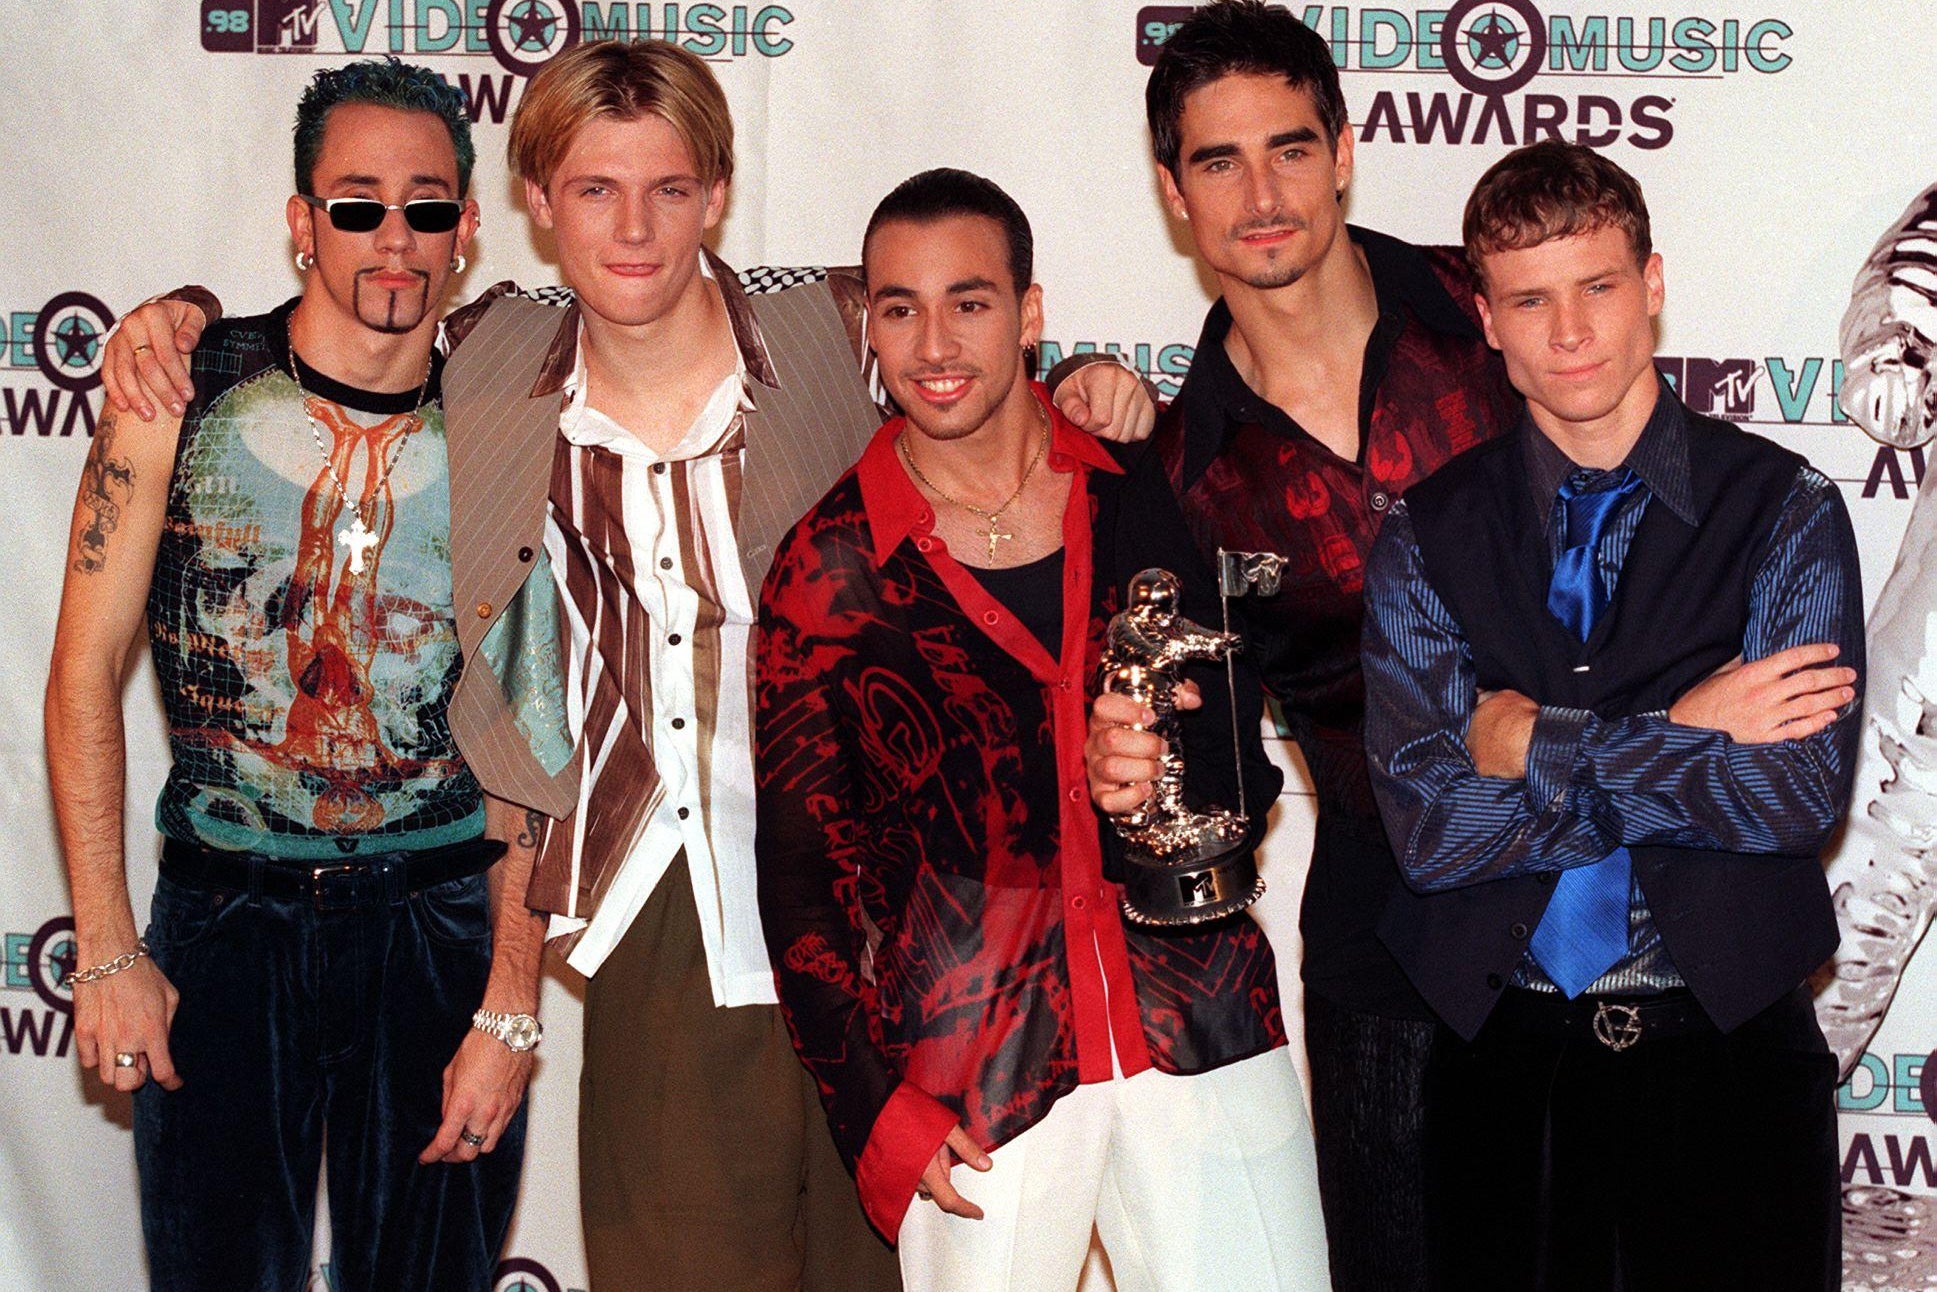 Five men pose together in front of a Video Music Awards step-and-repeat.